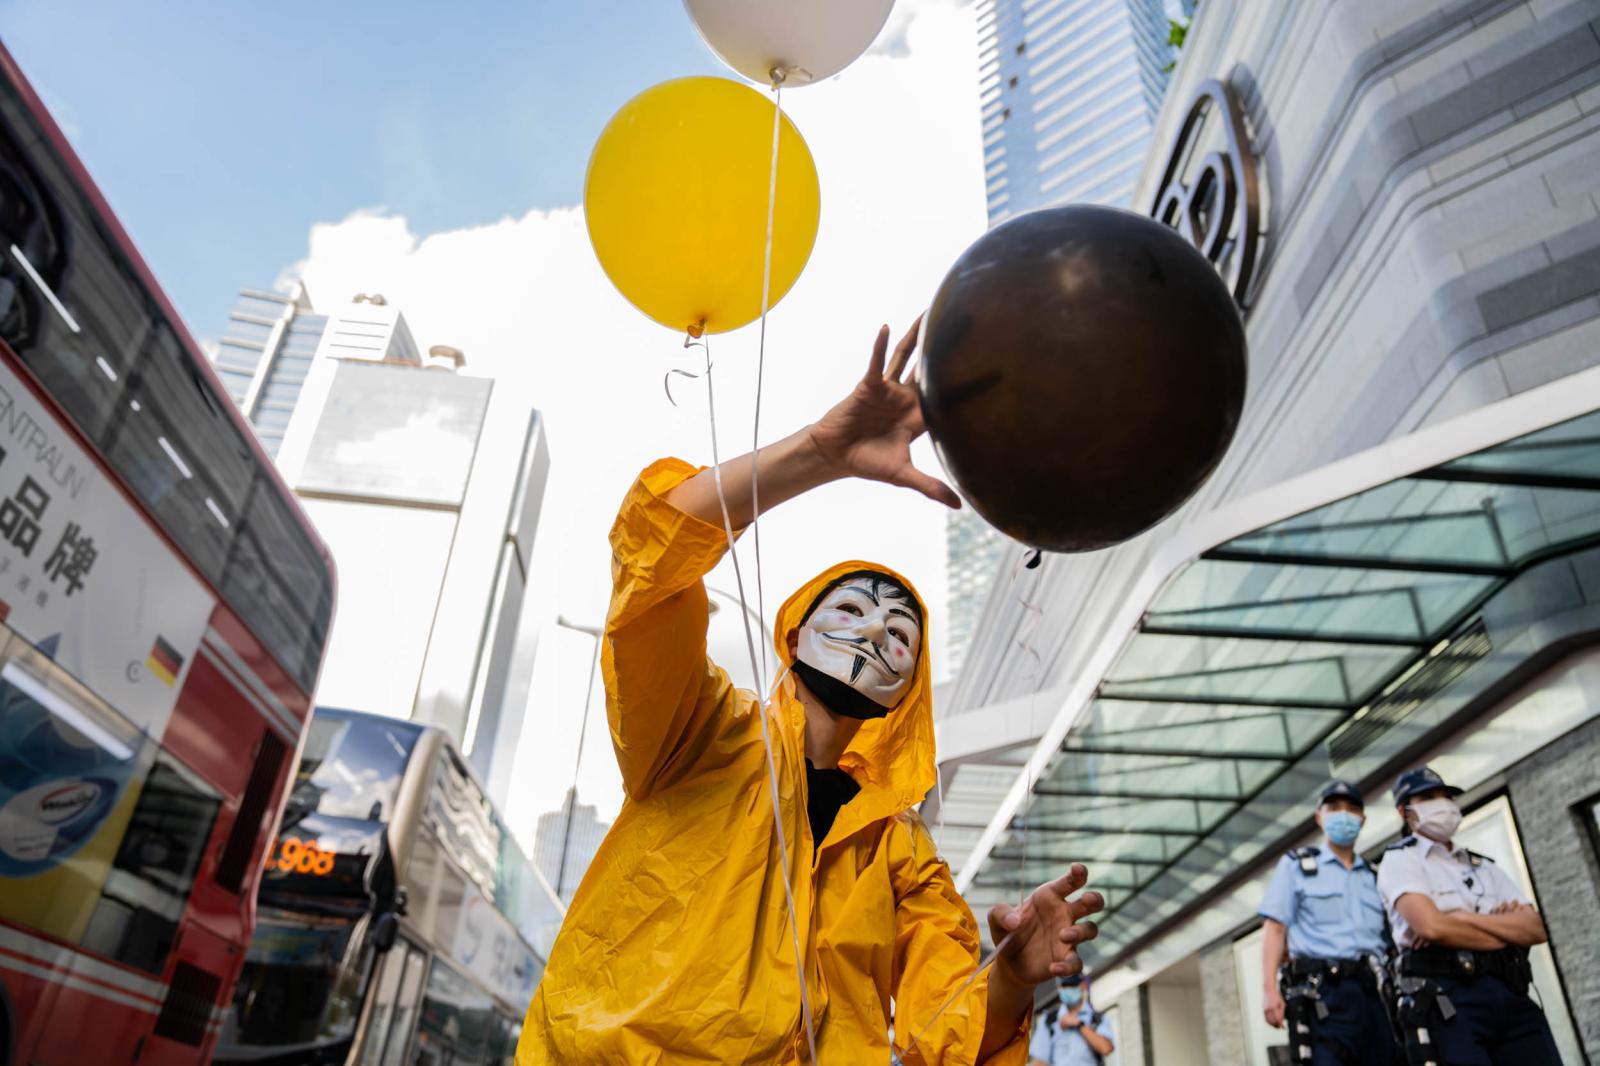 [2019-2021] Hong Kong Protests: Behind the Front Lines - A protestor dressed in a yellow raincoat with black,...